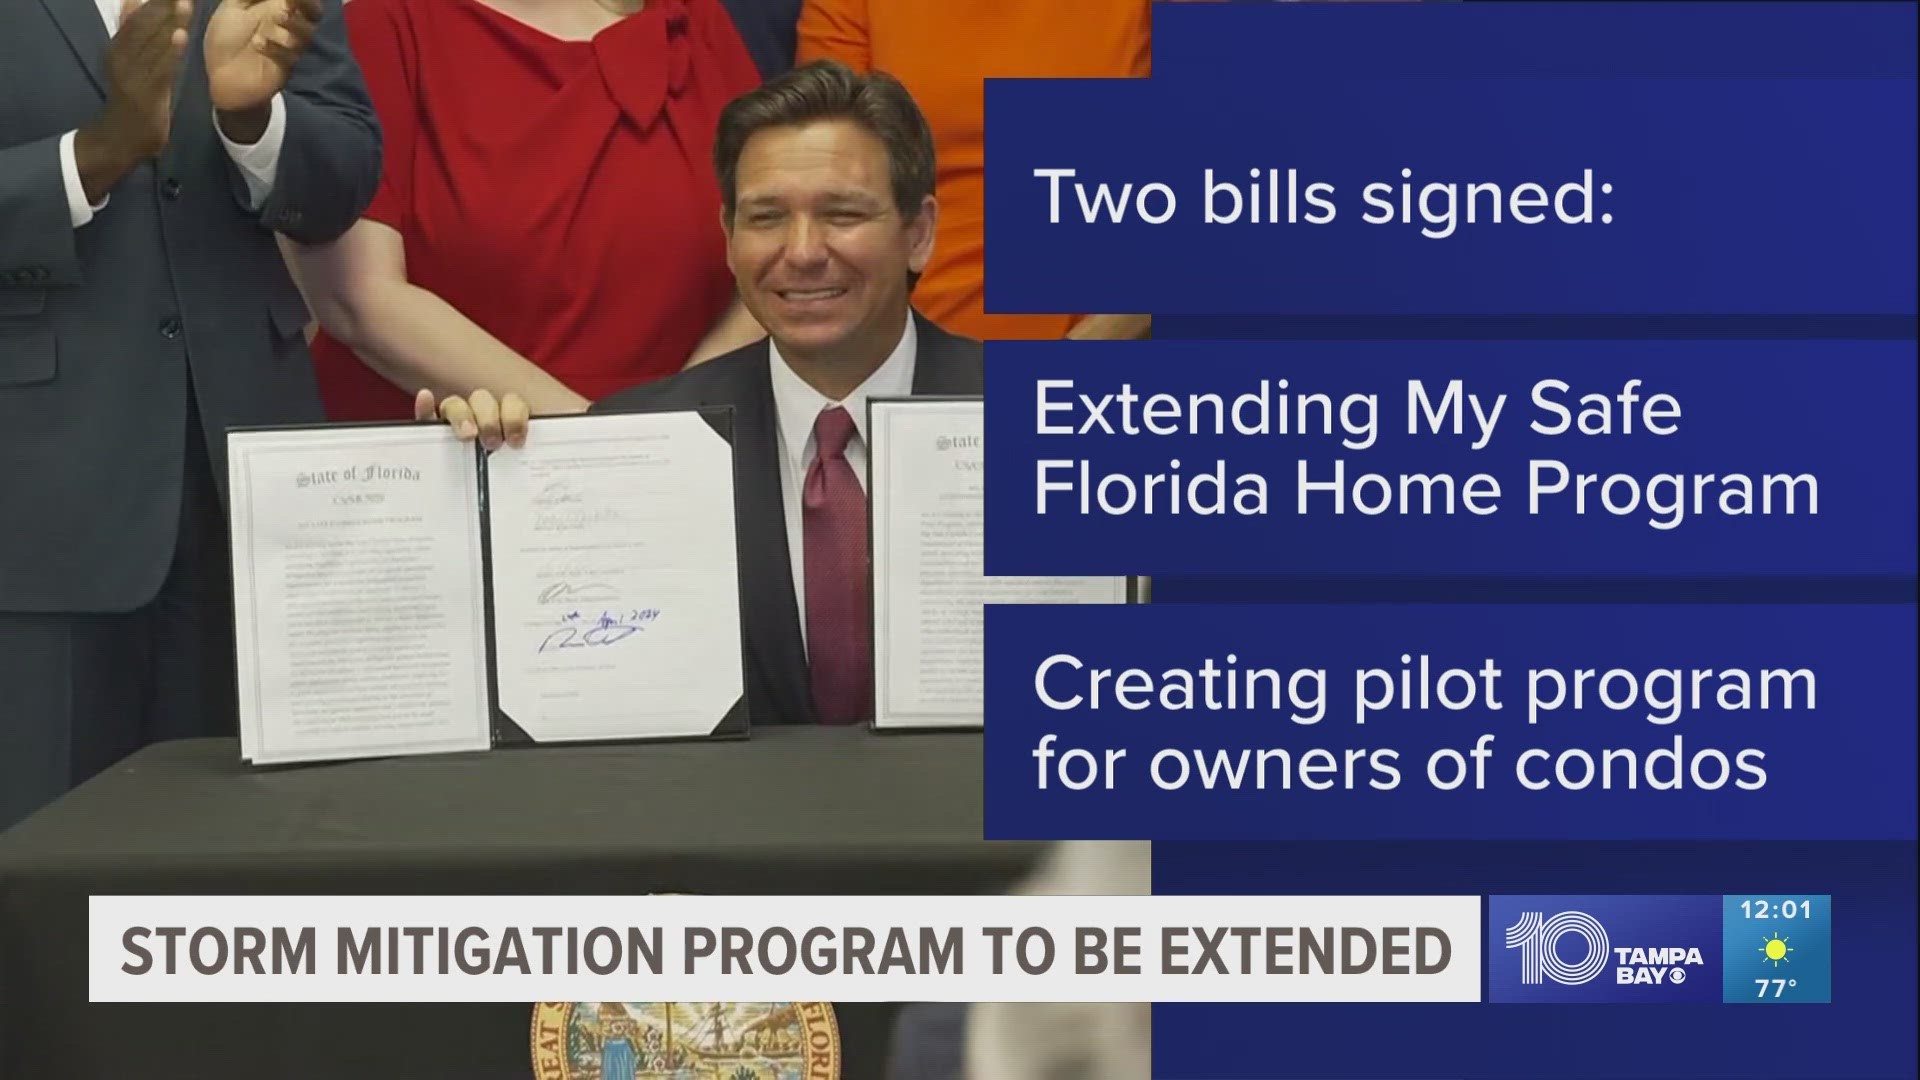 One of the bills gives eligible homeowners free hurricane mitigation inspections and allows them to apply for grant money to make needed improvements.